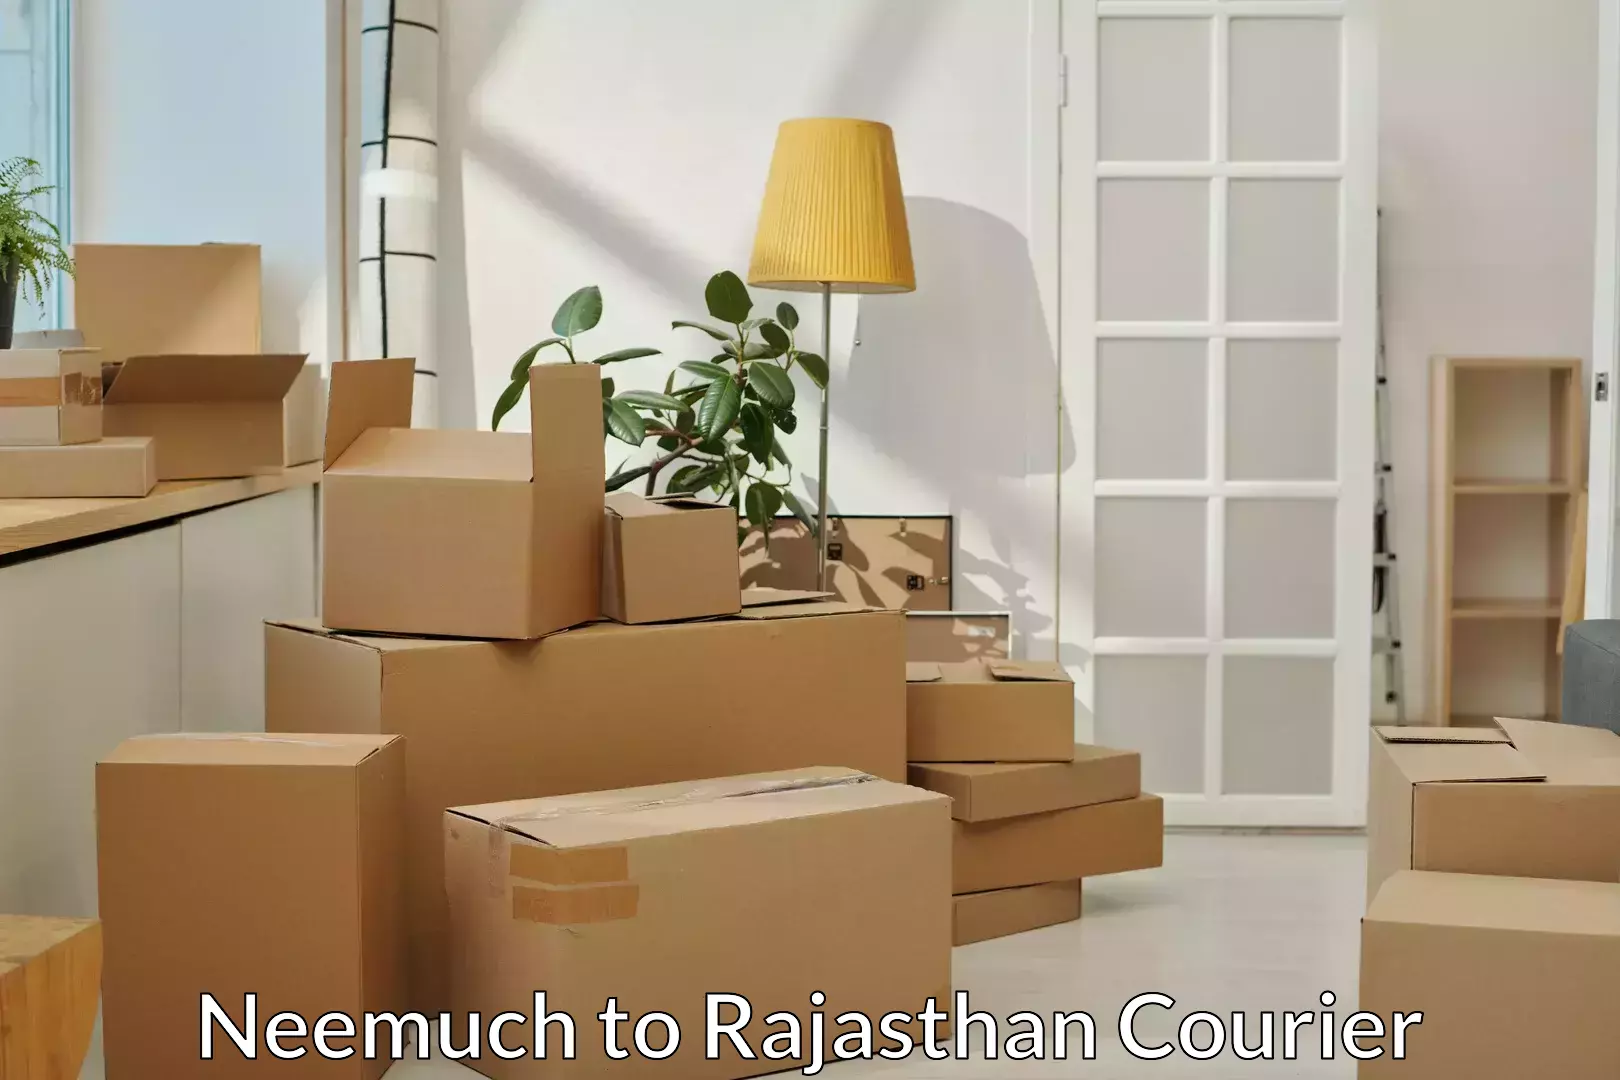 Furniture delivery service Neemuch to Sambhar